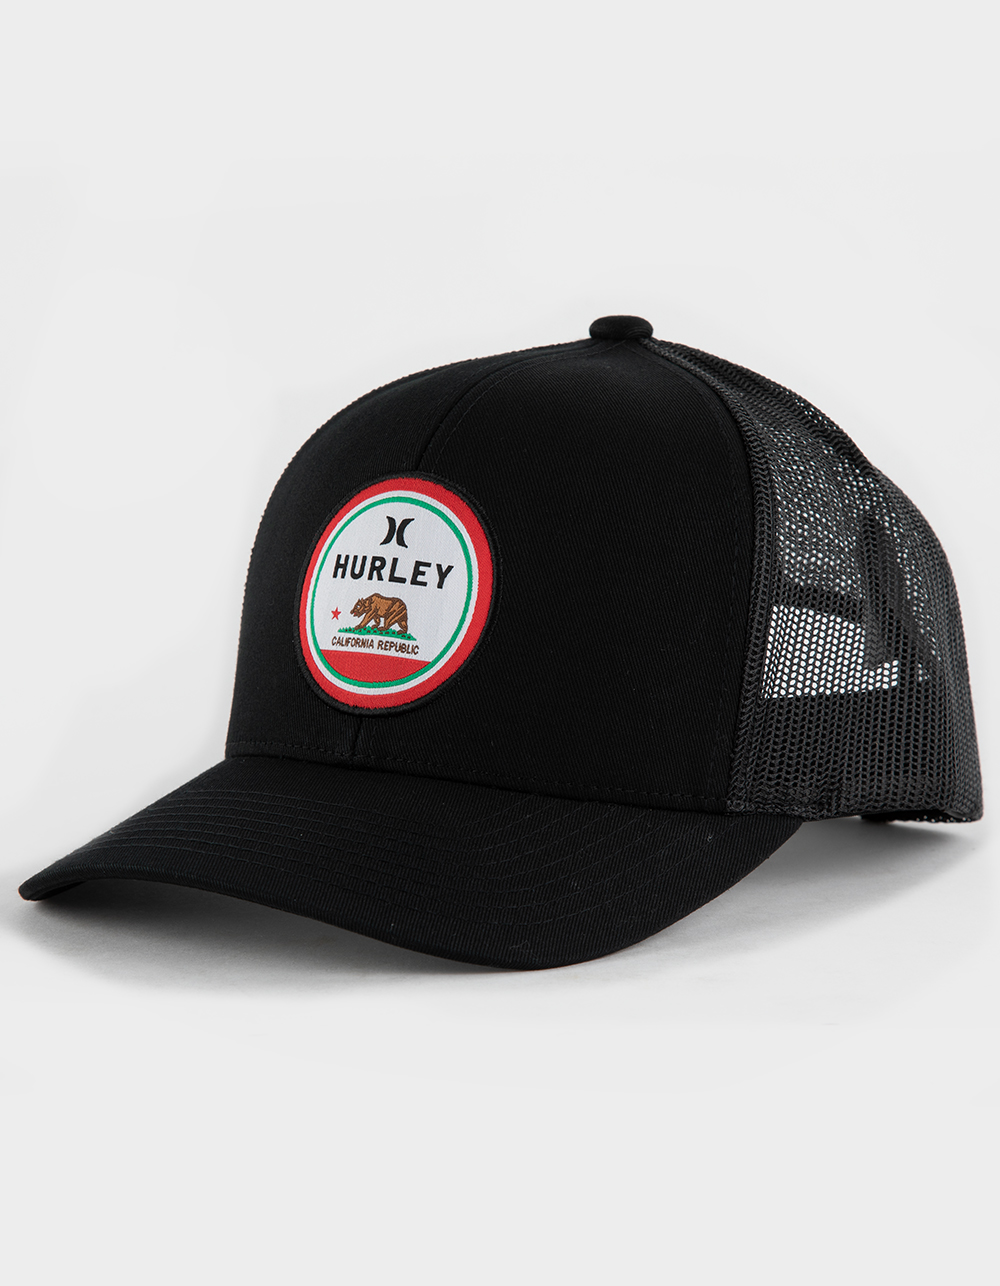 Hurley Local Trucker Hat - Black/White - One Size